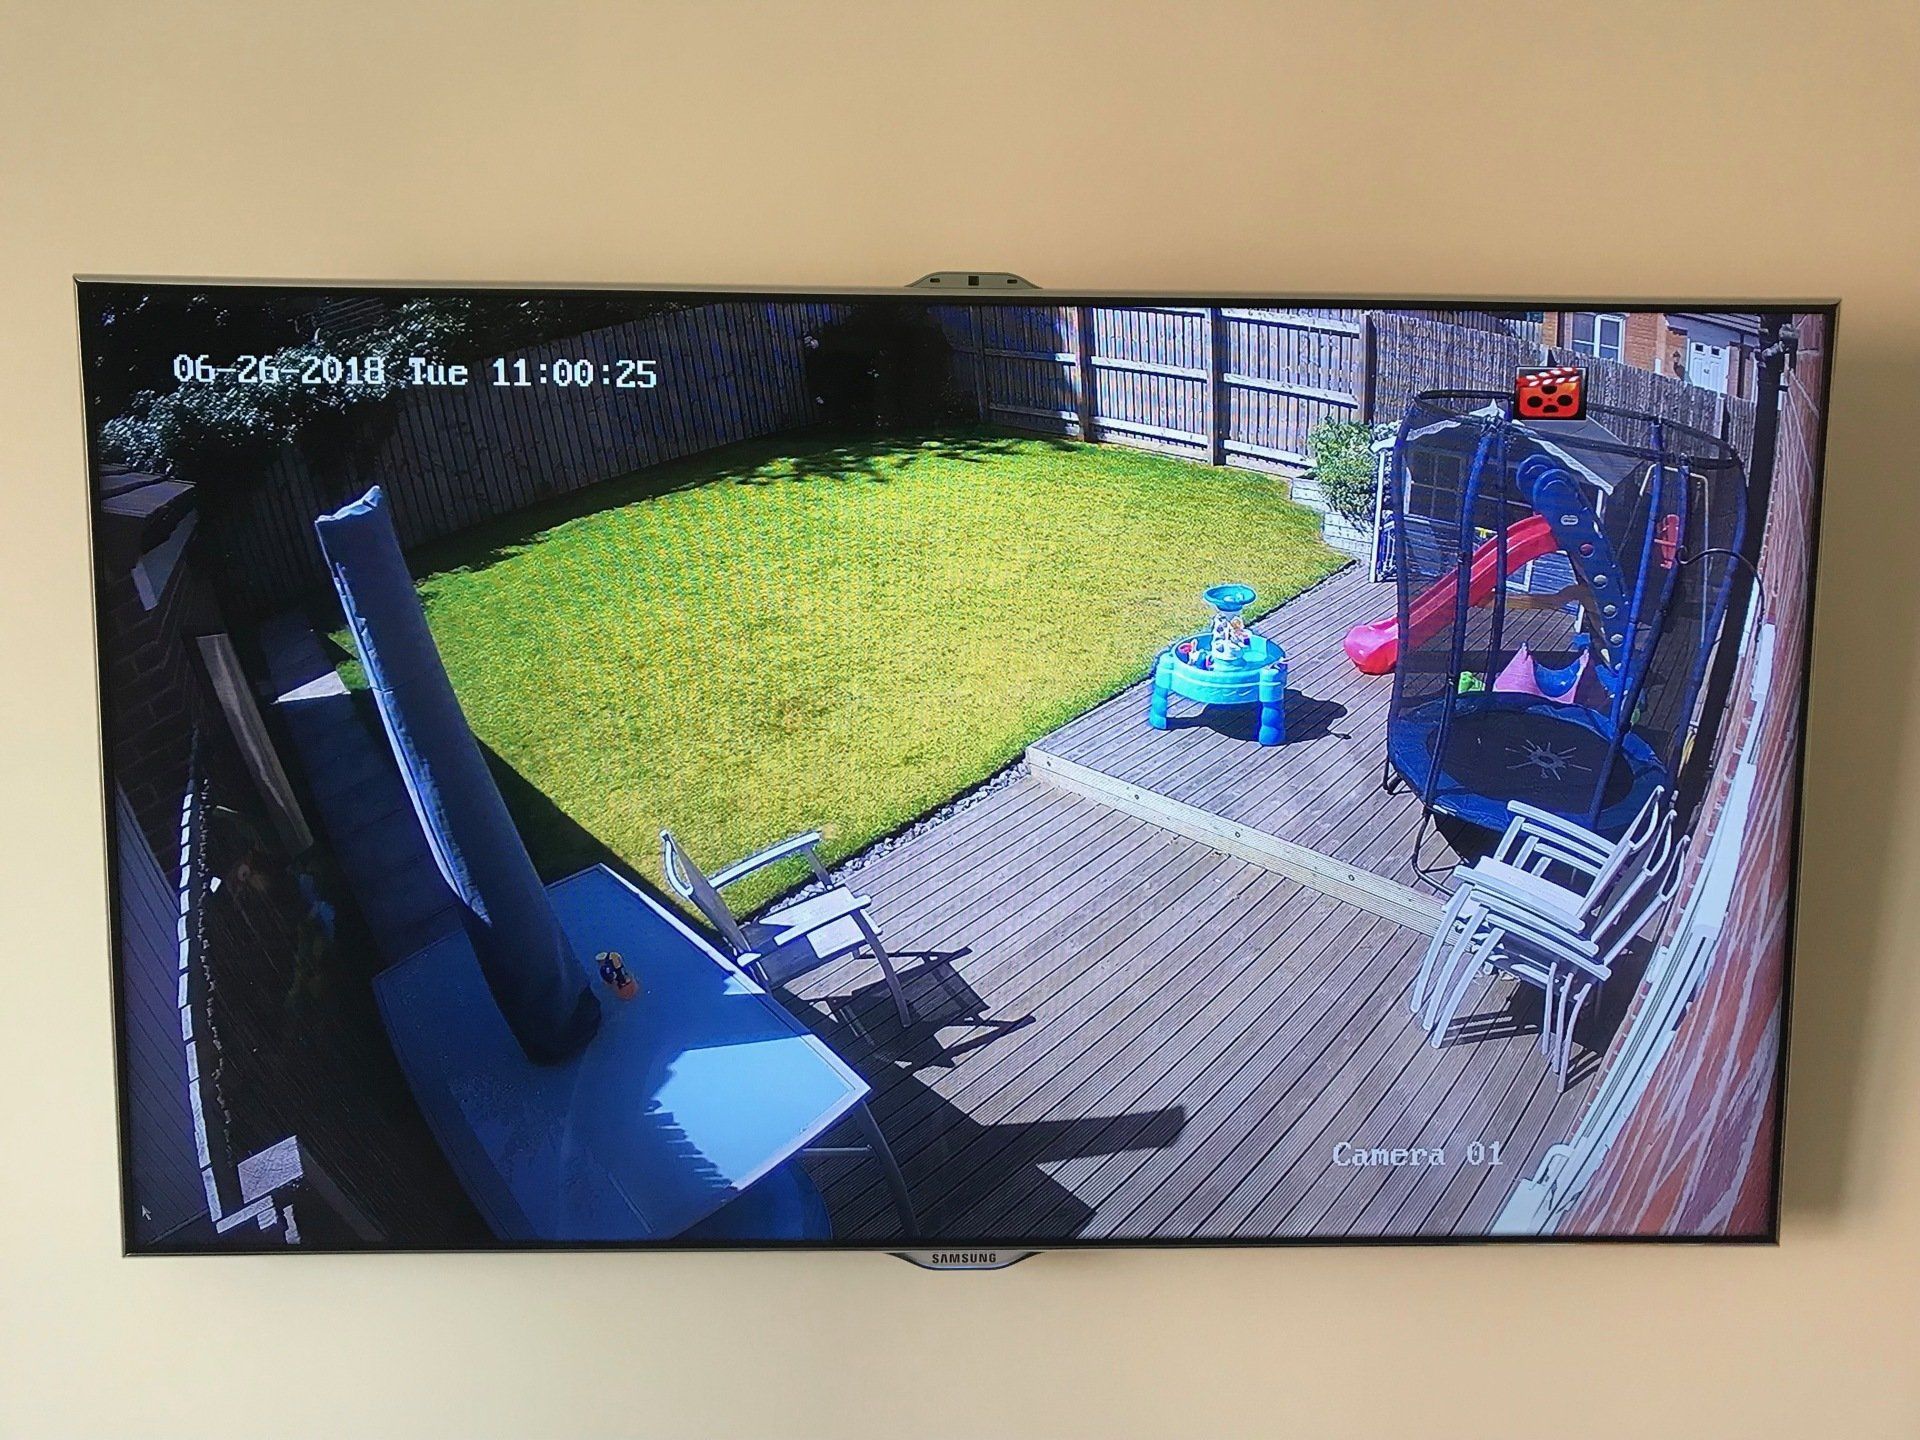 CCTV camera view displayed on a TV